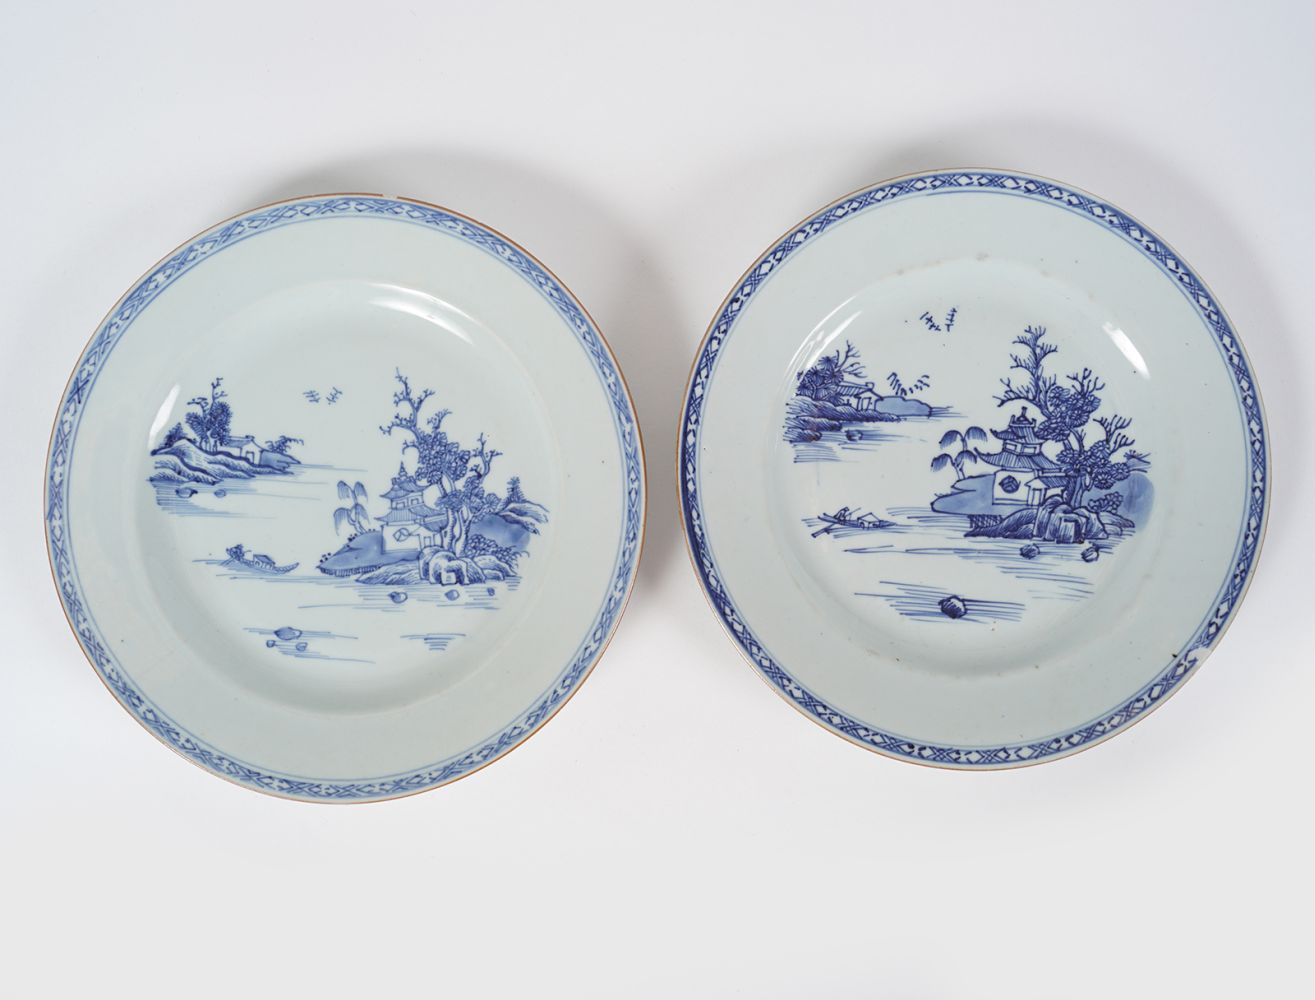 PR OF 18TH-CENTURY CHINESE BLUE AND WHITE PLATES